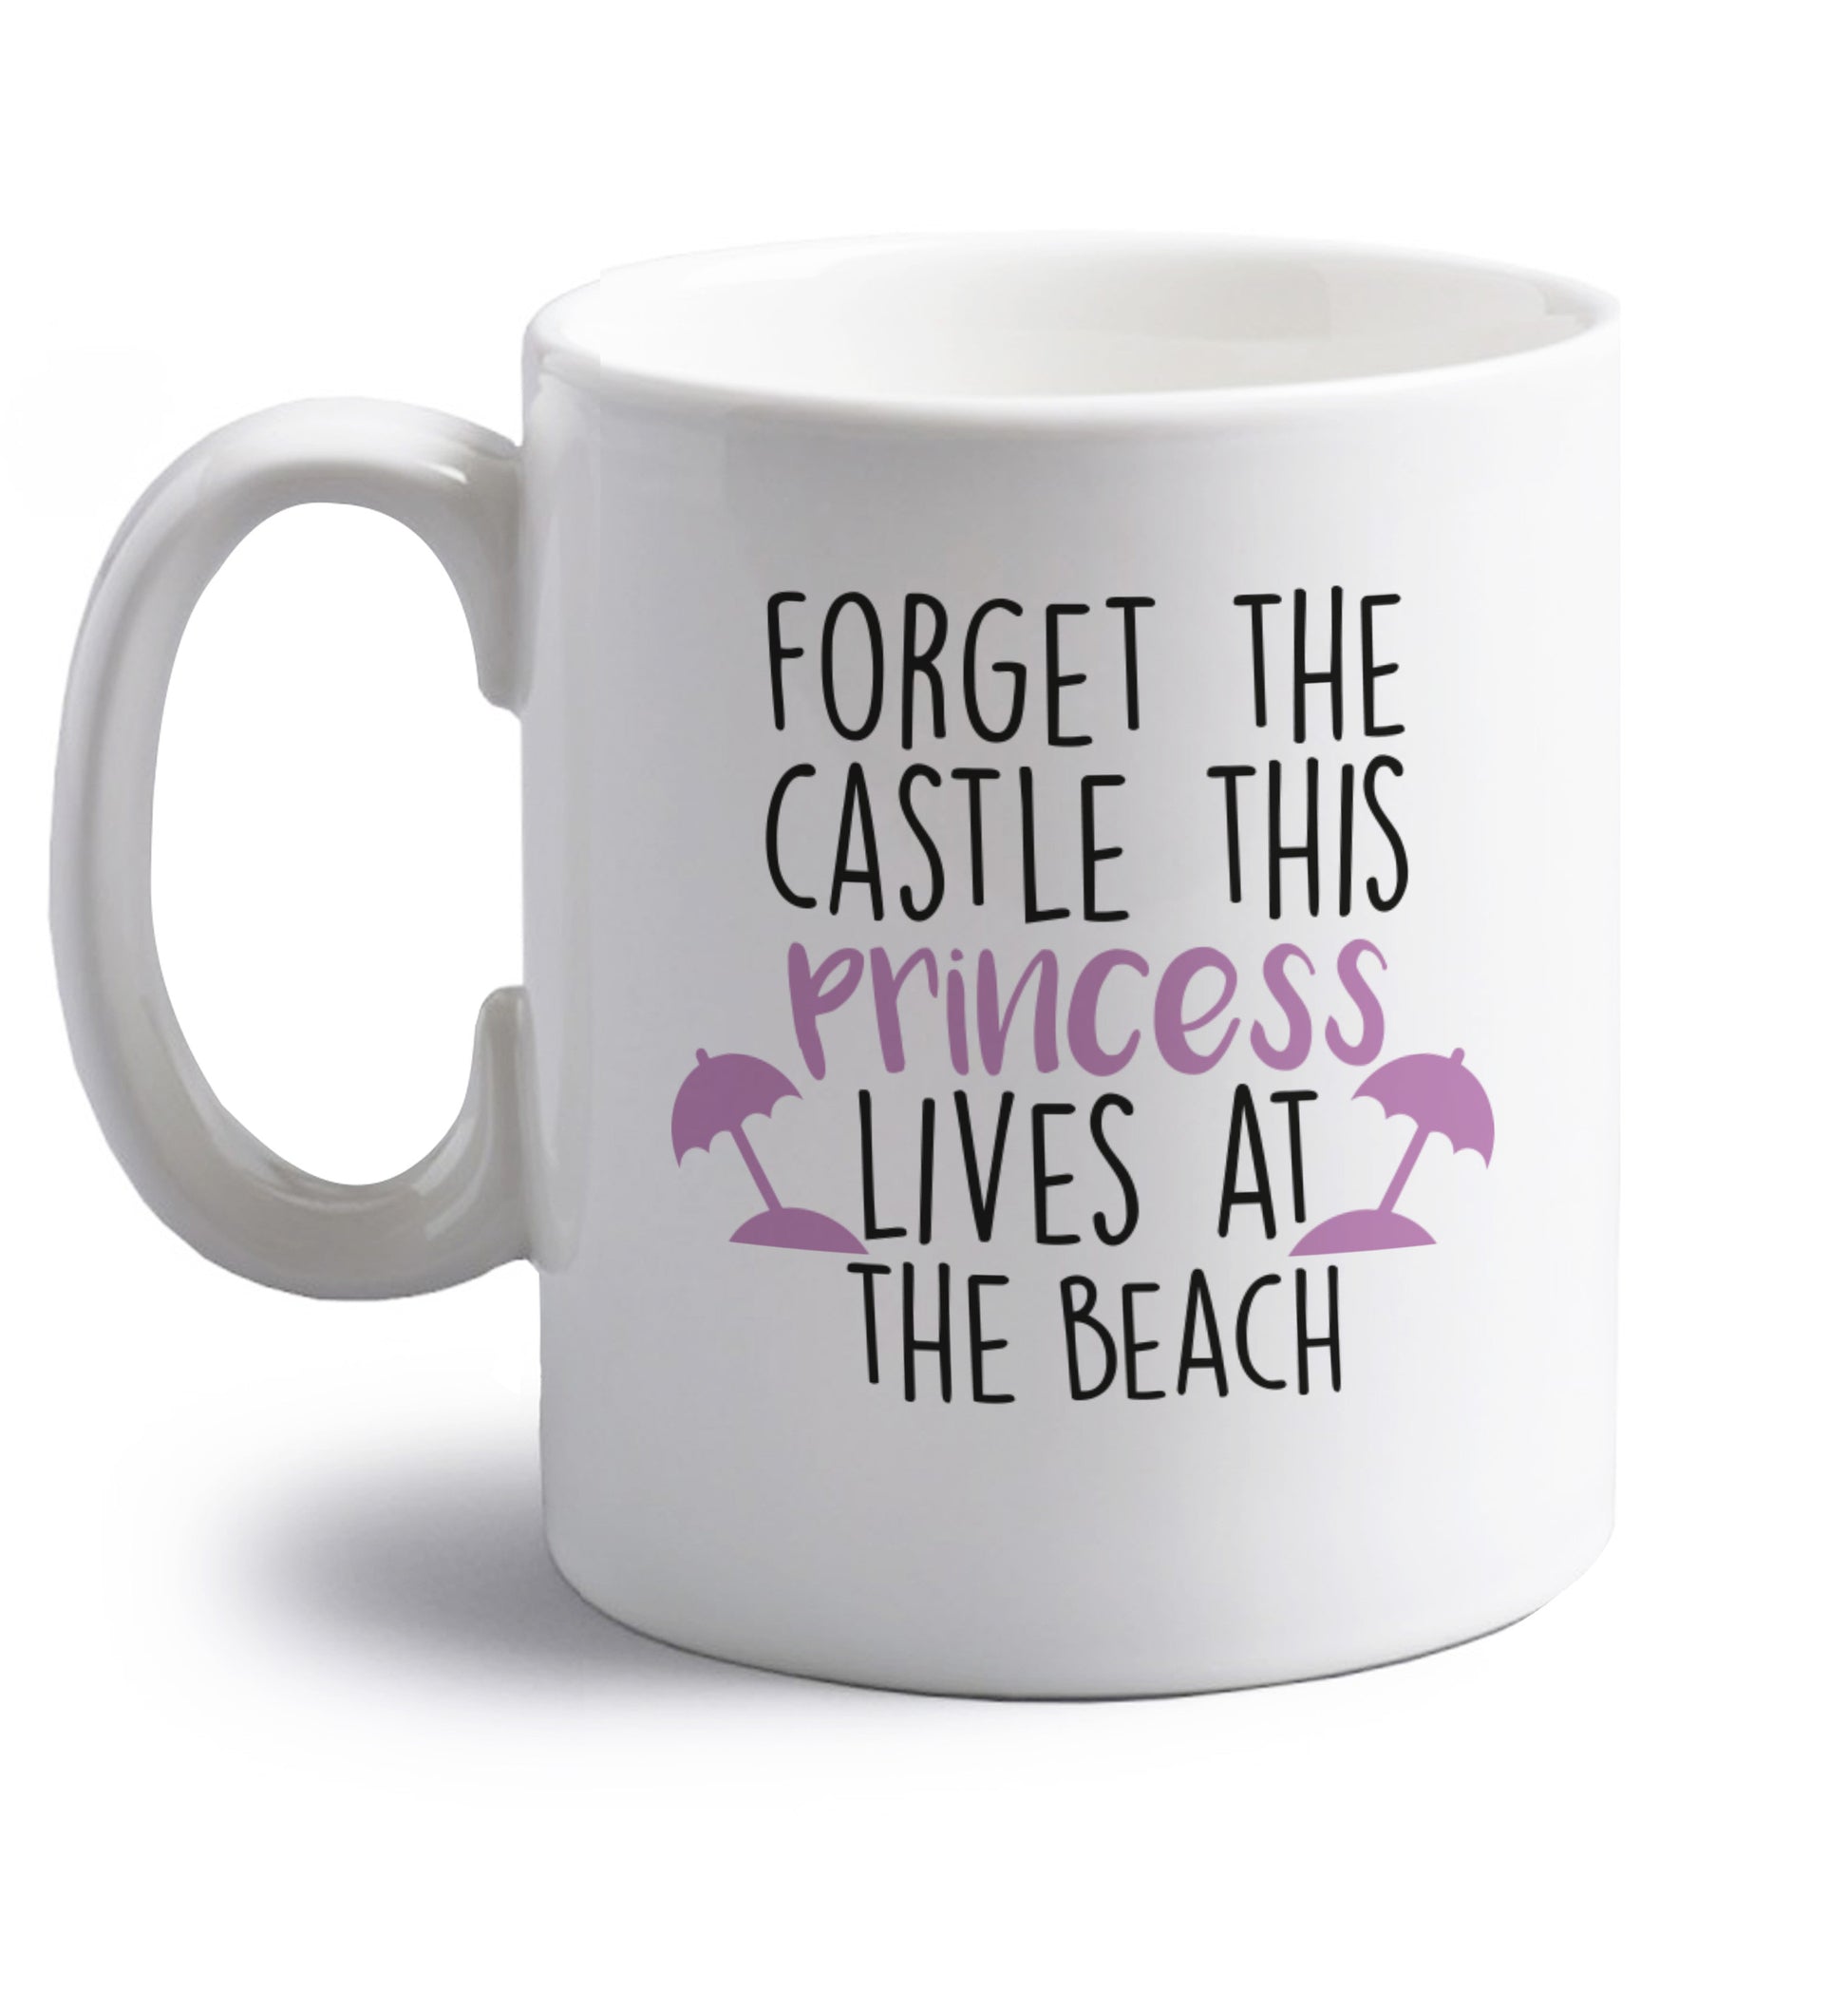 Forget the castle this princess lives at the beach right handed white ceramic mug 